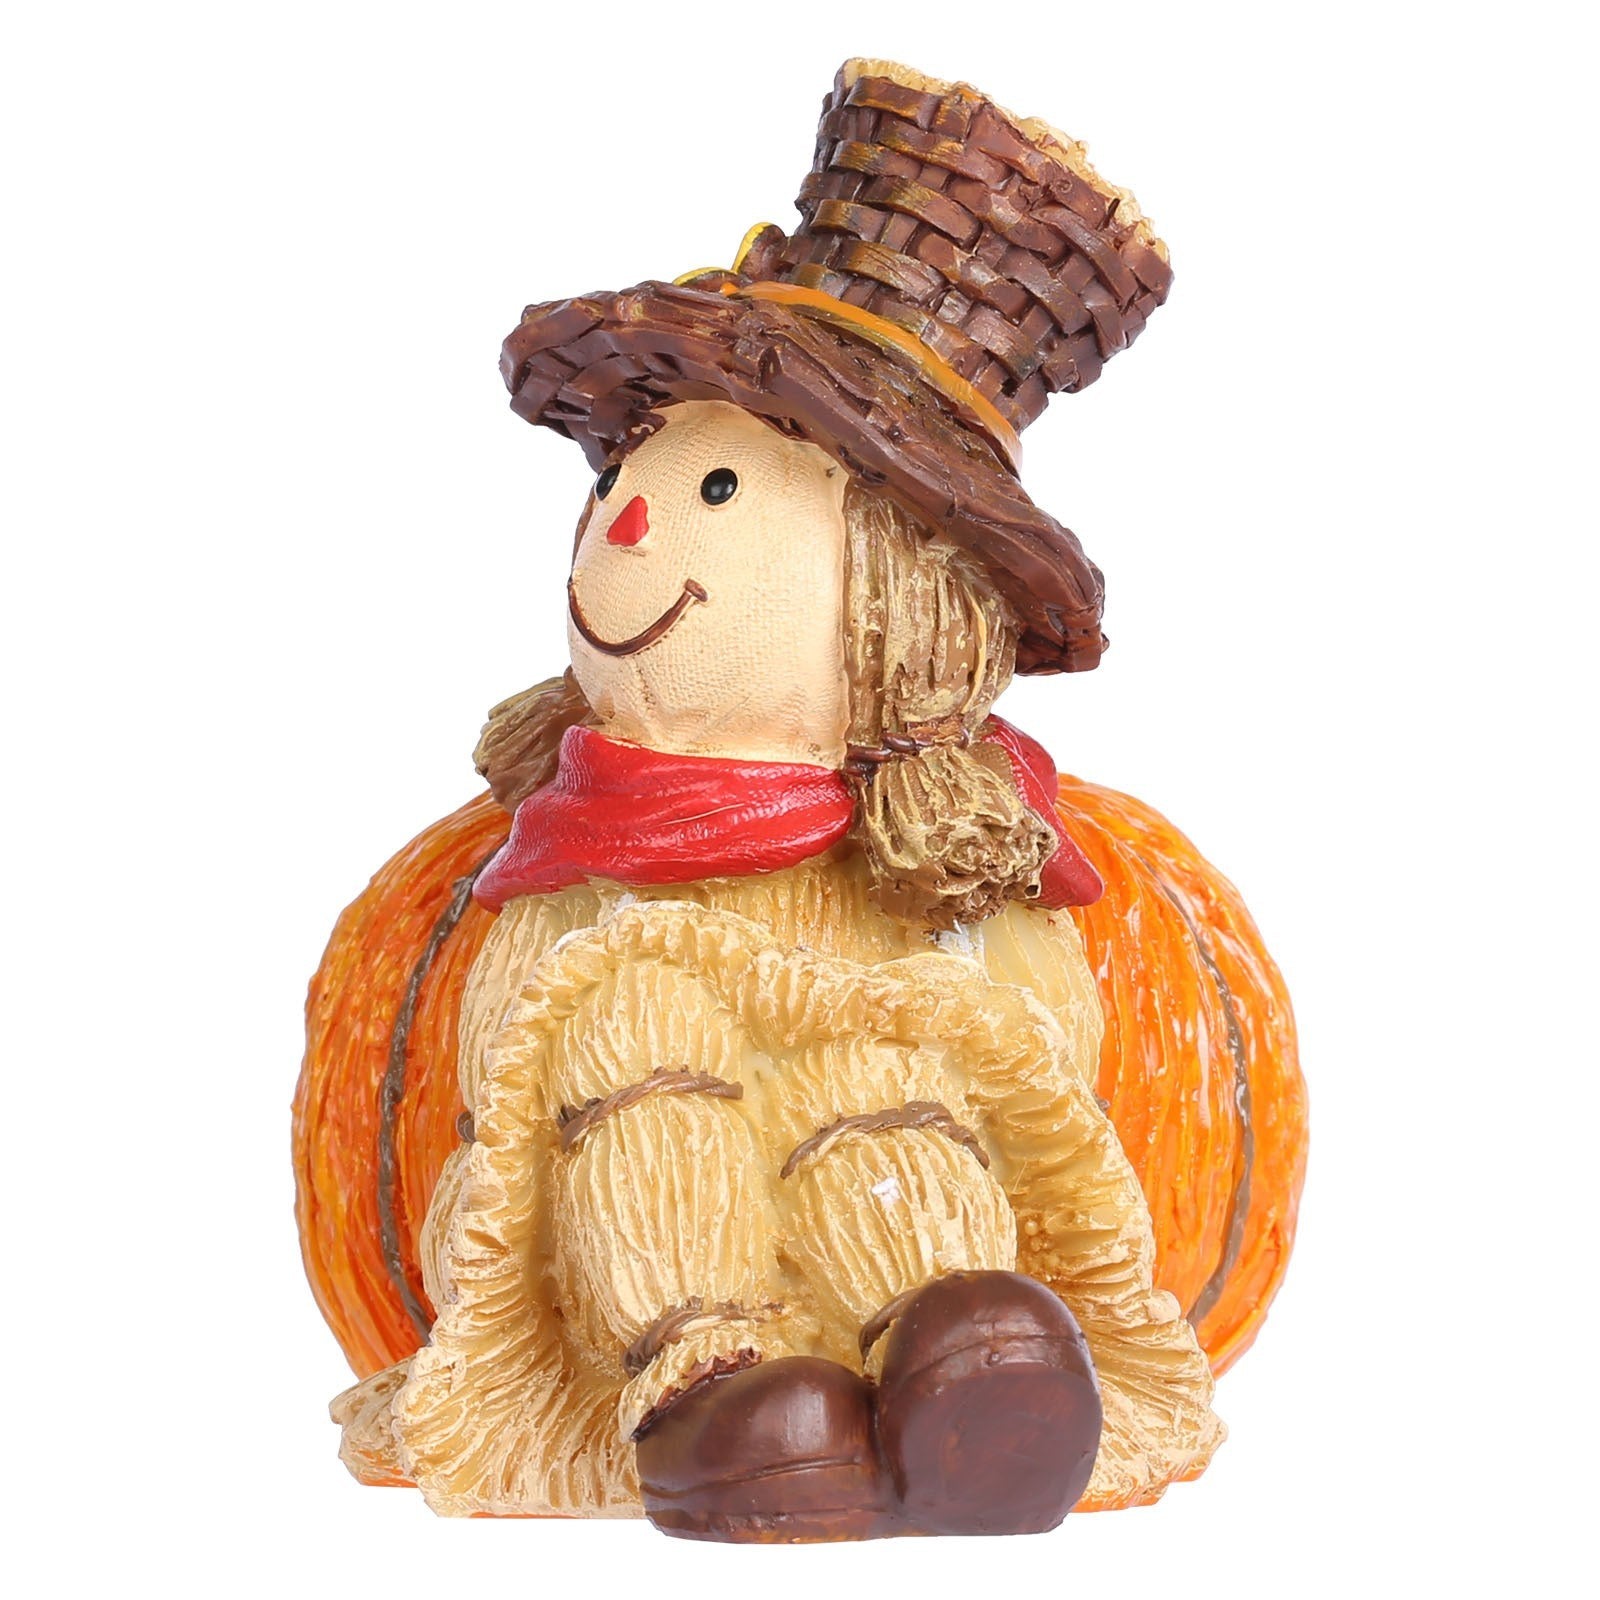 Pumpkin is a perfect little ornament for your christmas or thanksgiving!